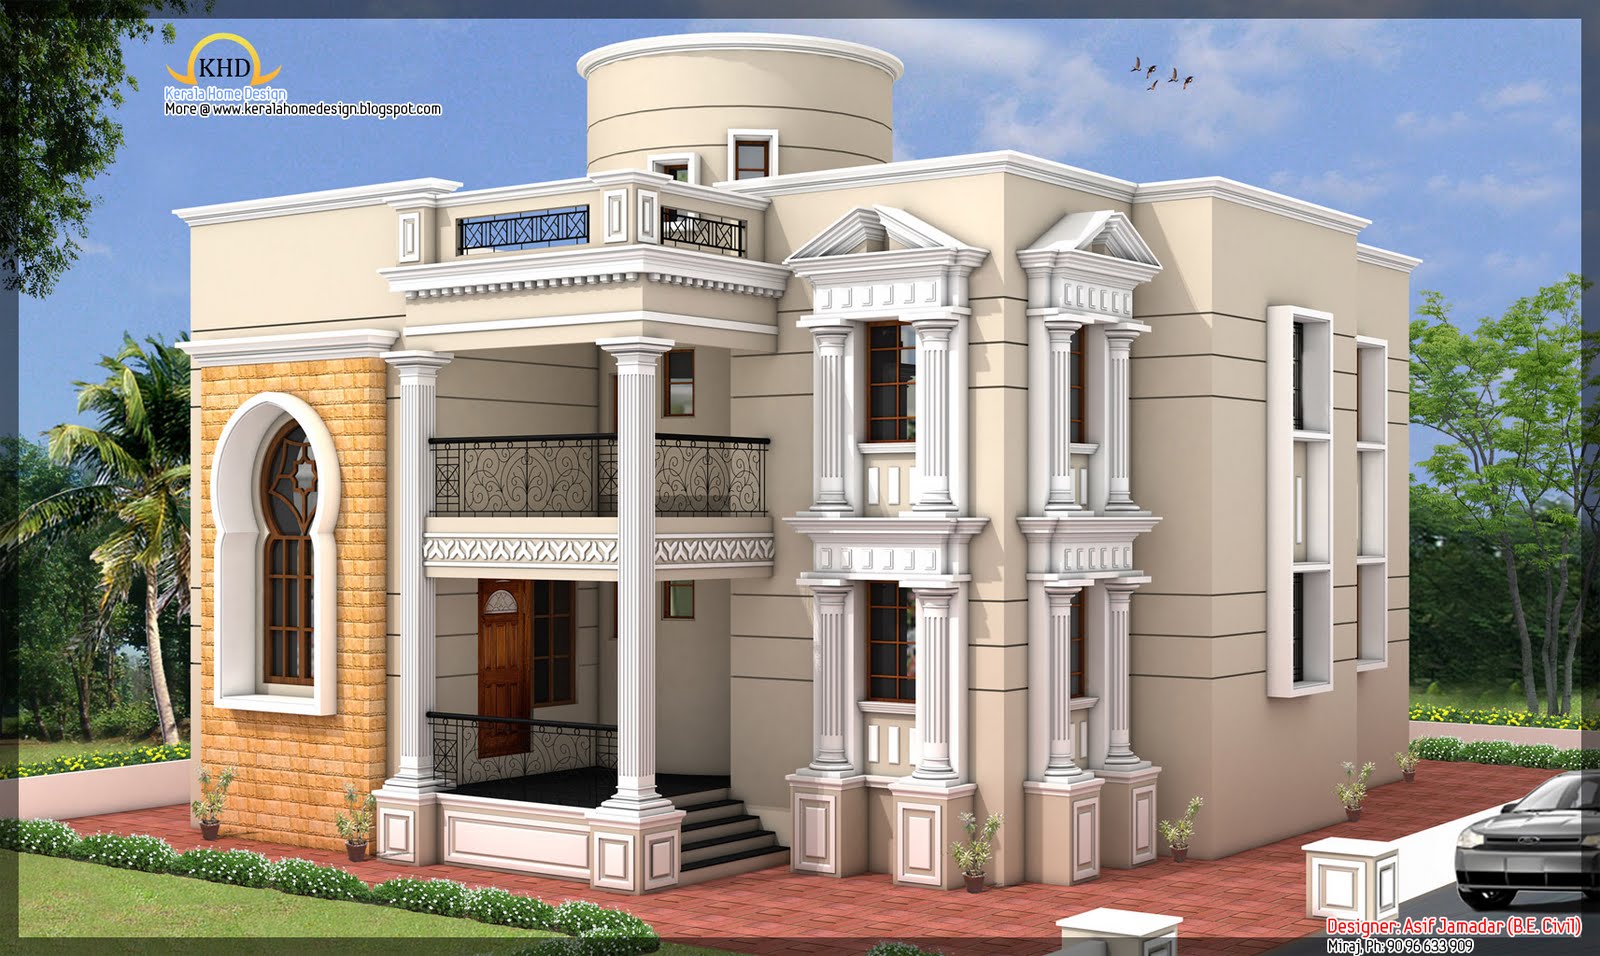 House Elevation  3881 sq ft  Kerala home design and floor plans